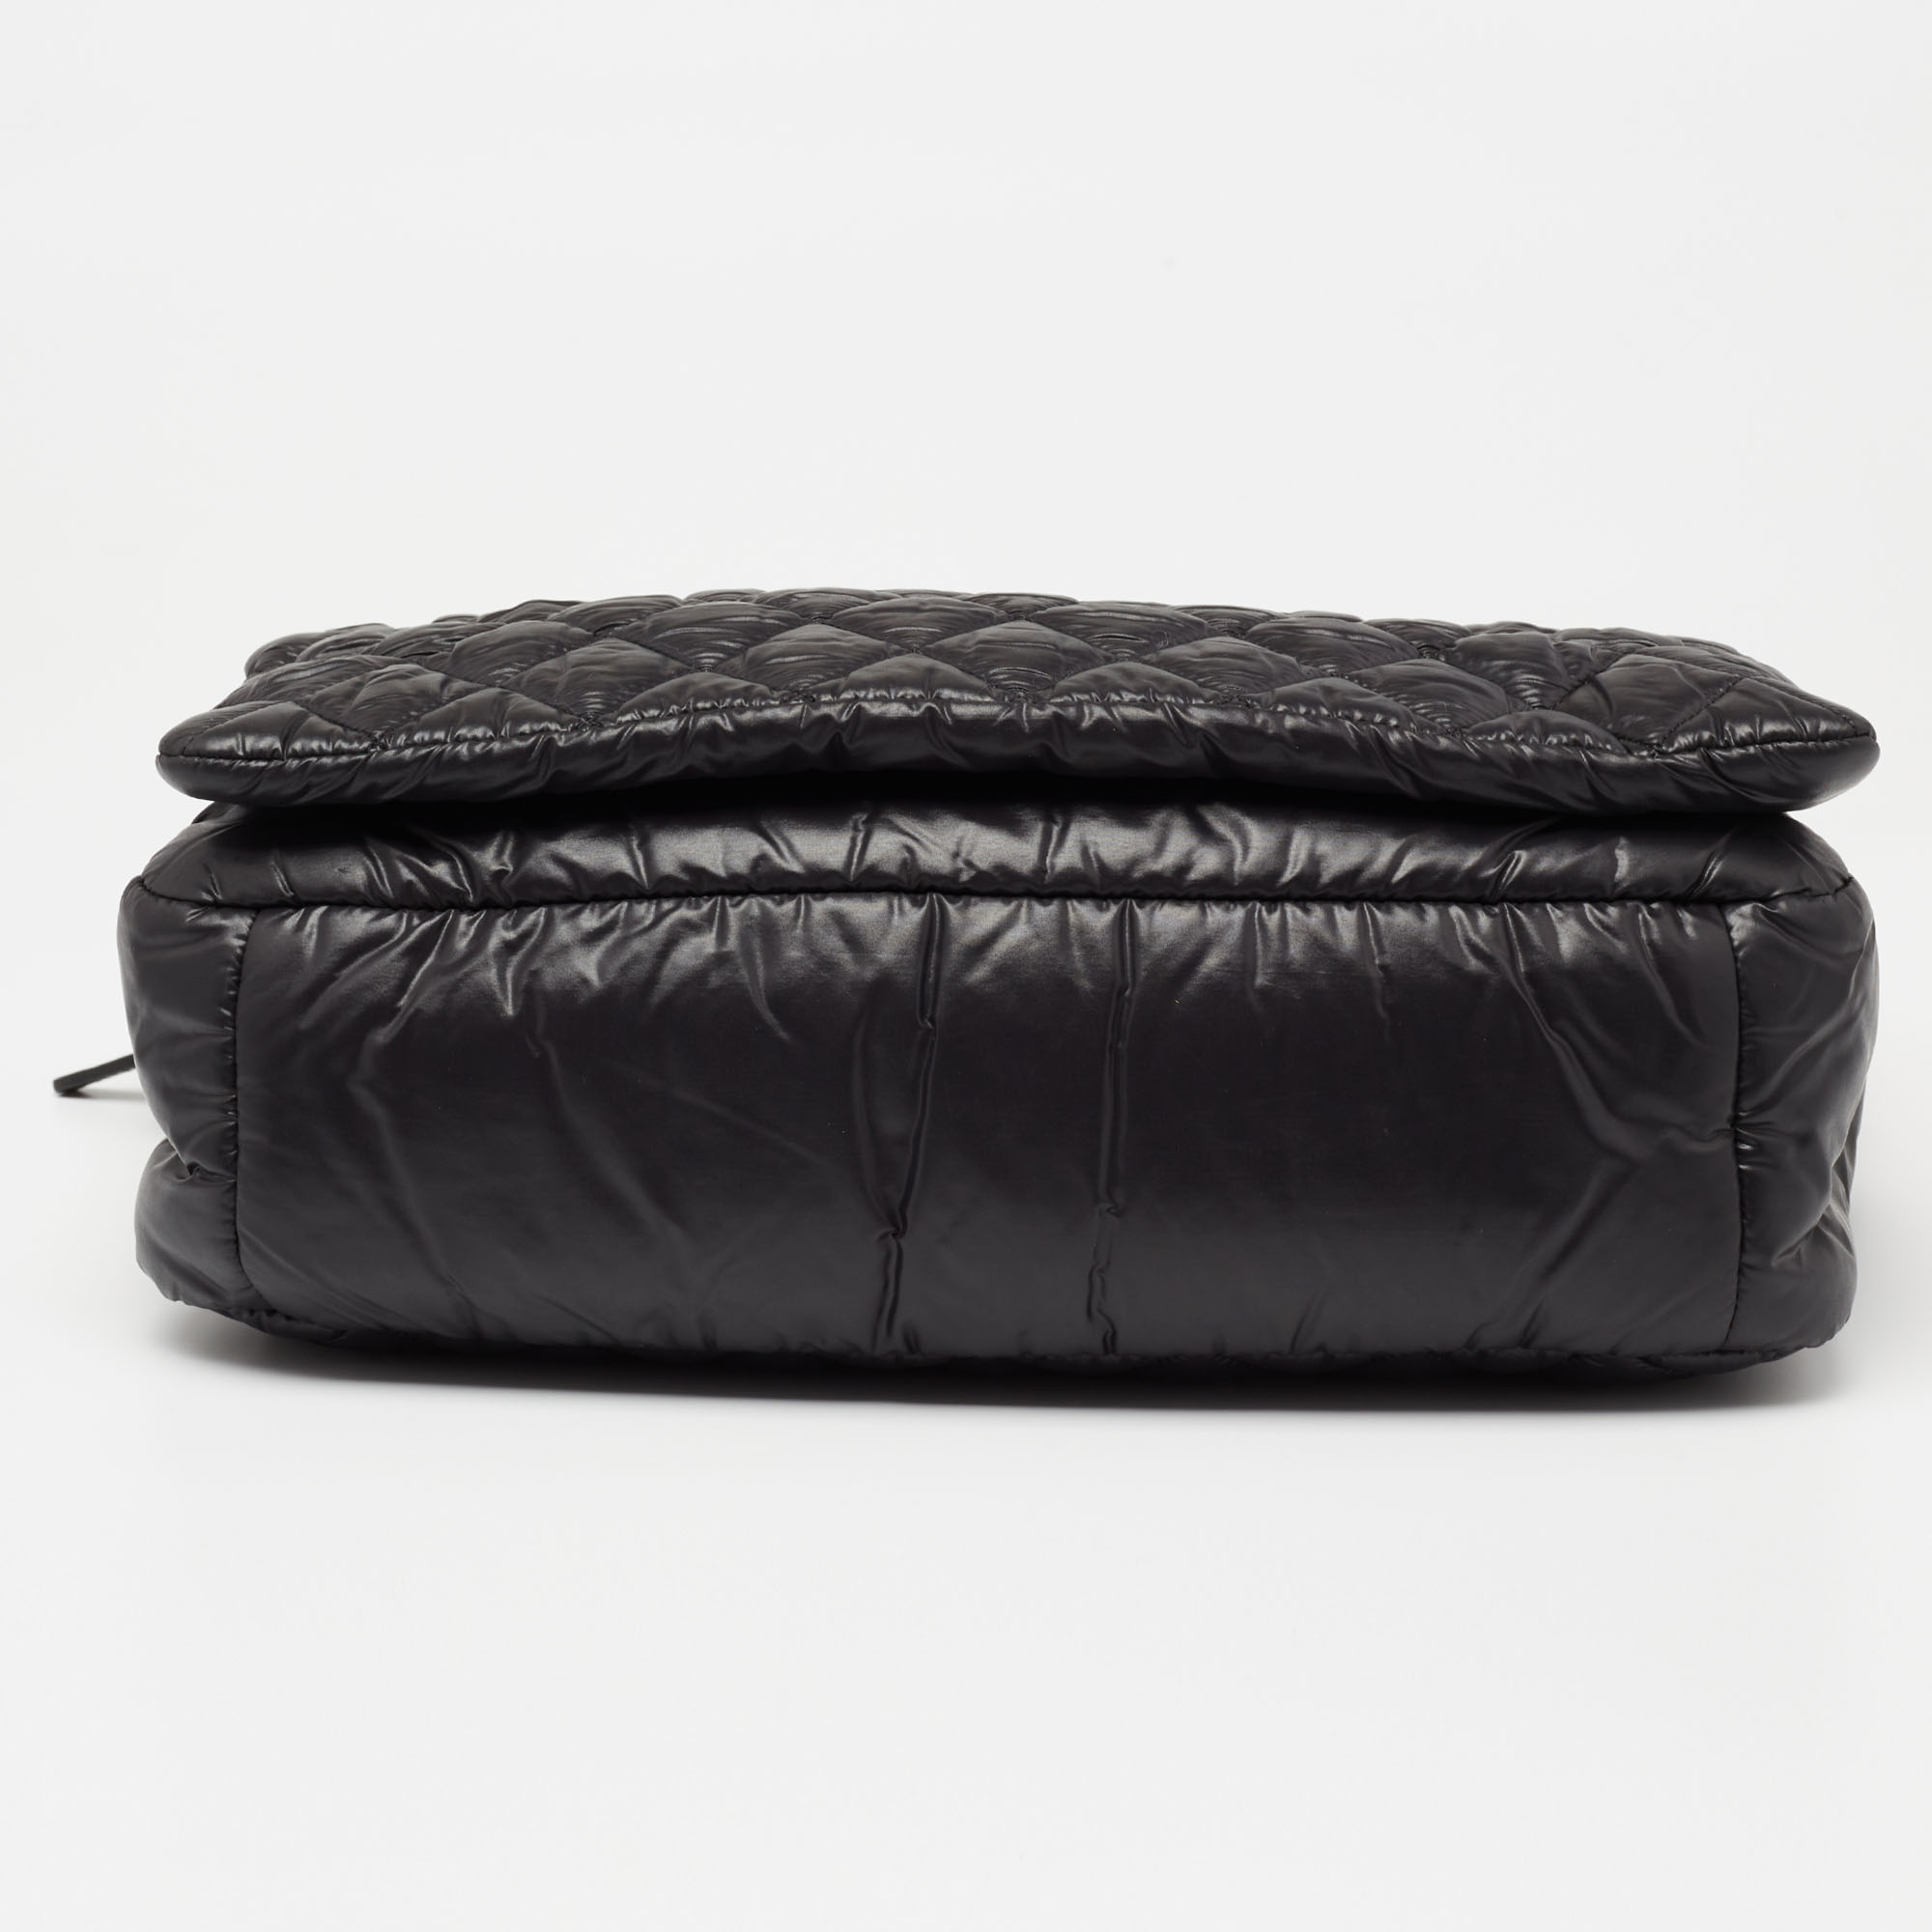 Chanel Black Quilted Nylon Coco Cocoon Messenger Bag